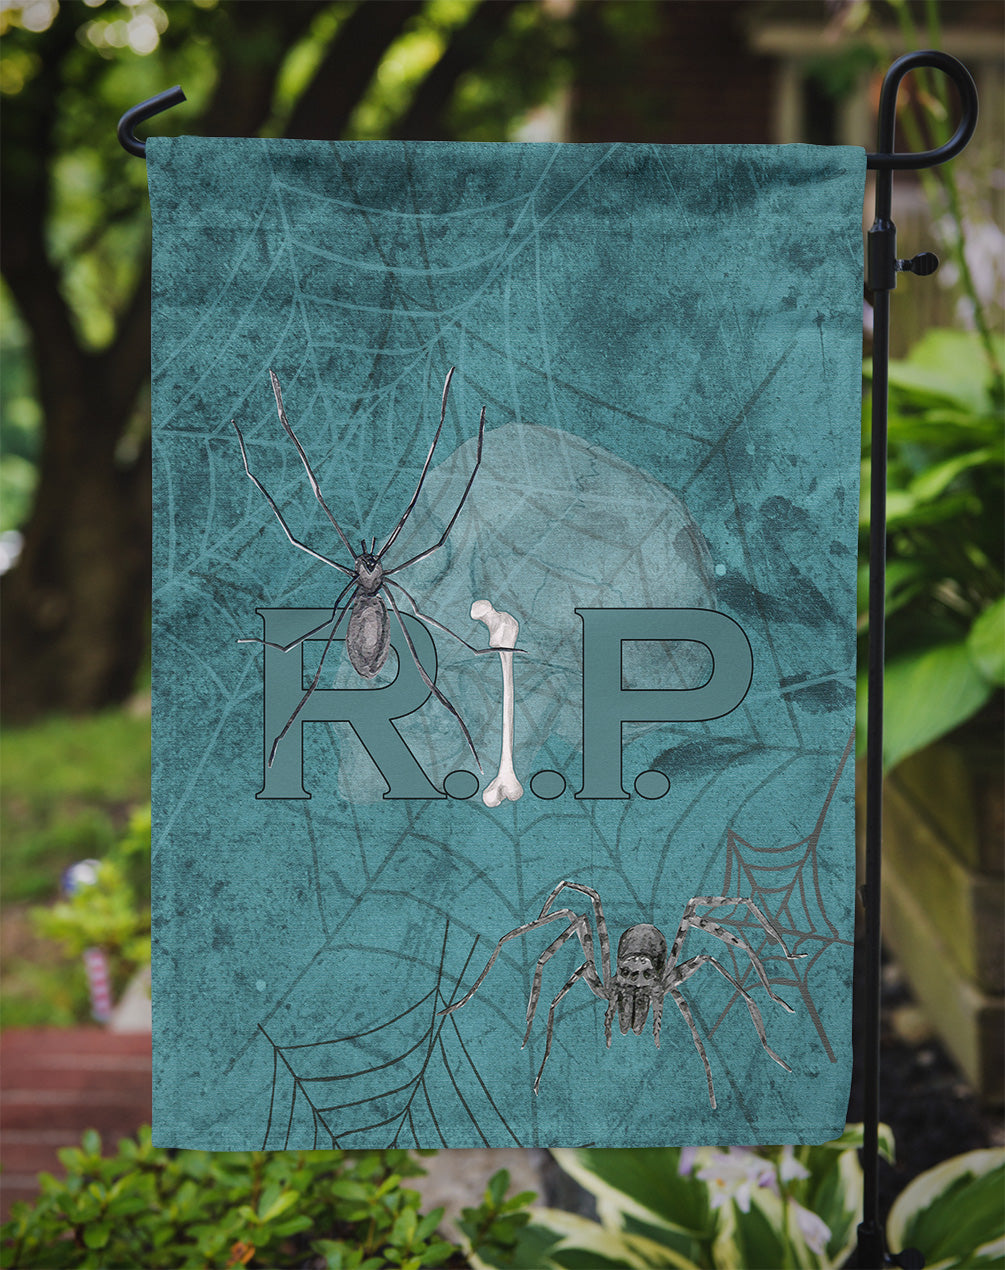 RIP Rest in Peace with spider web Halloween Flag Garden Size